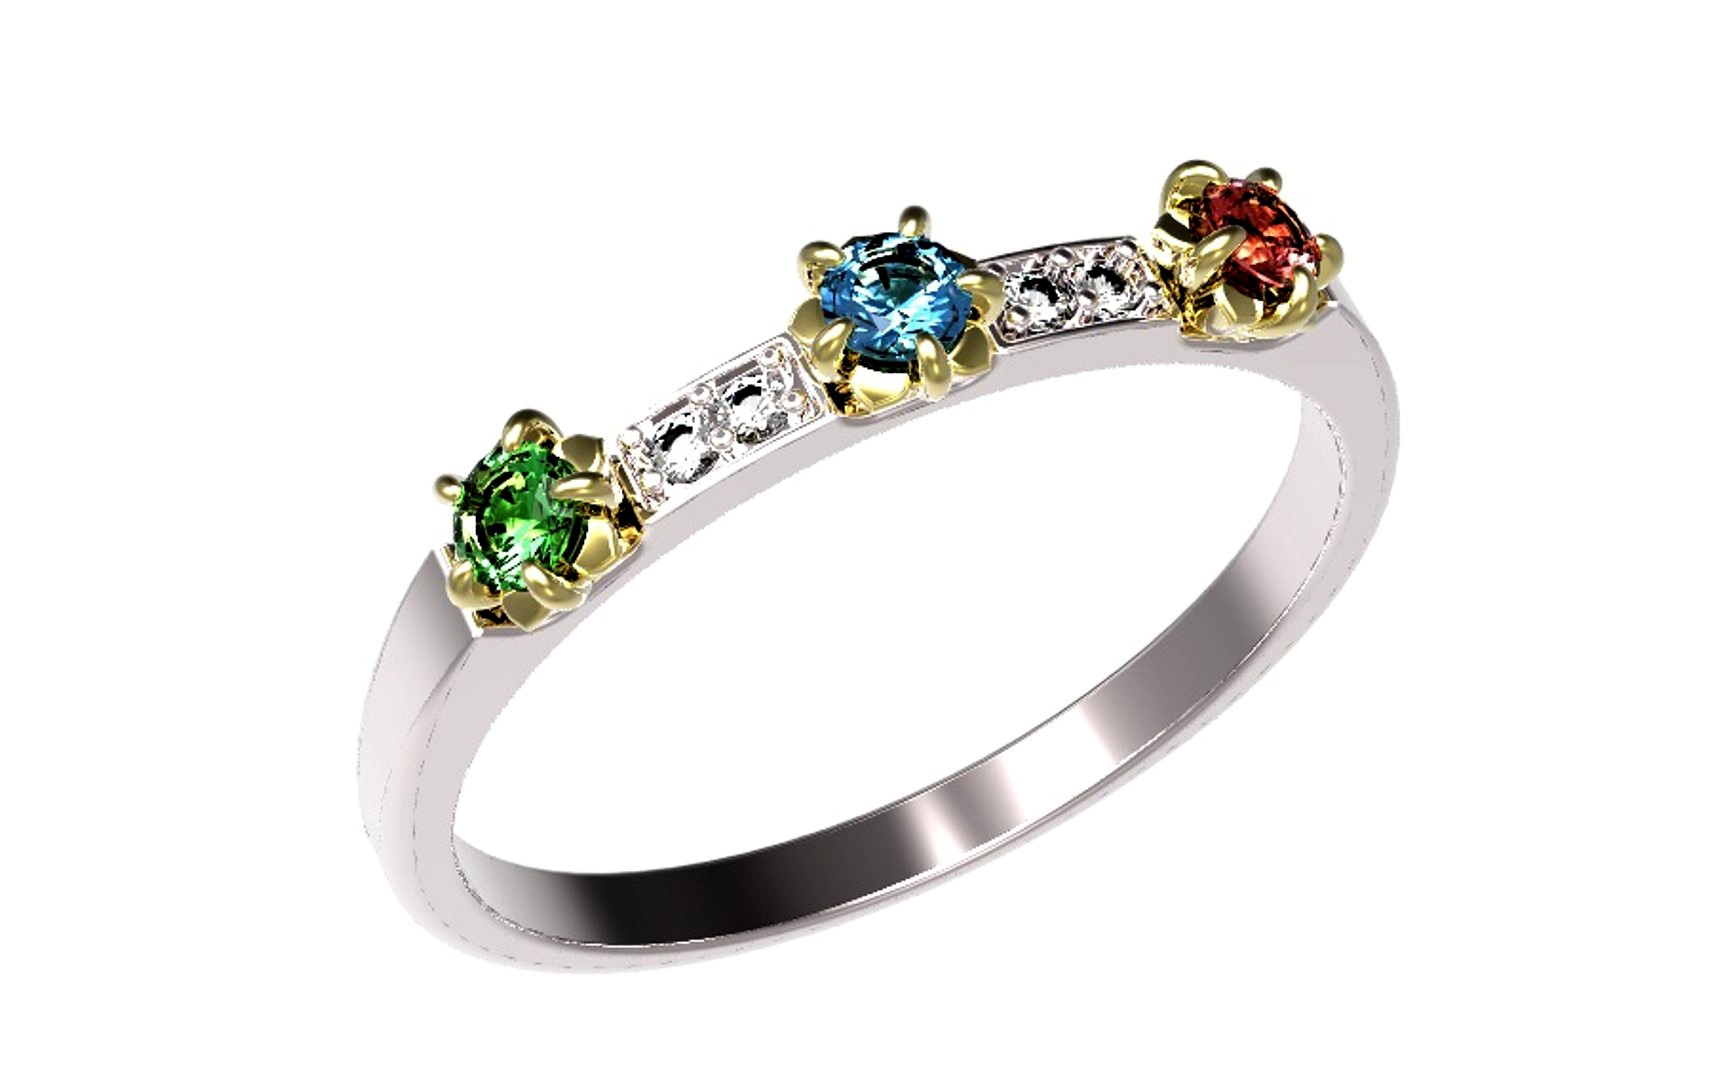 Gold ring with diamonds, sapphires, rubies and emeralds.